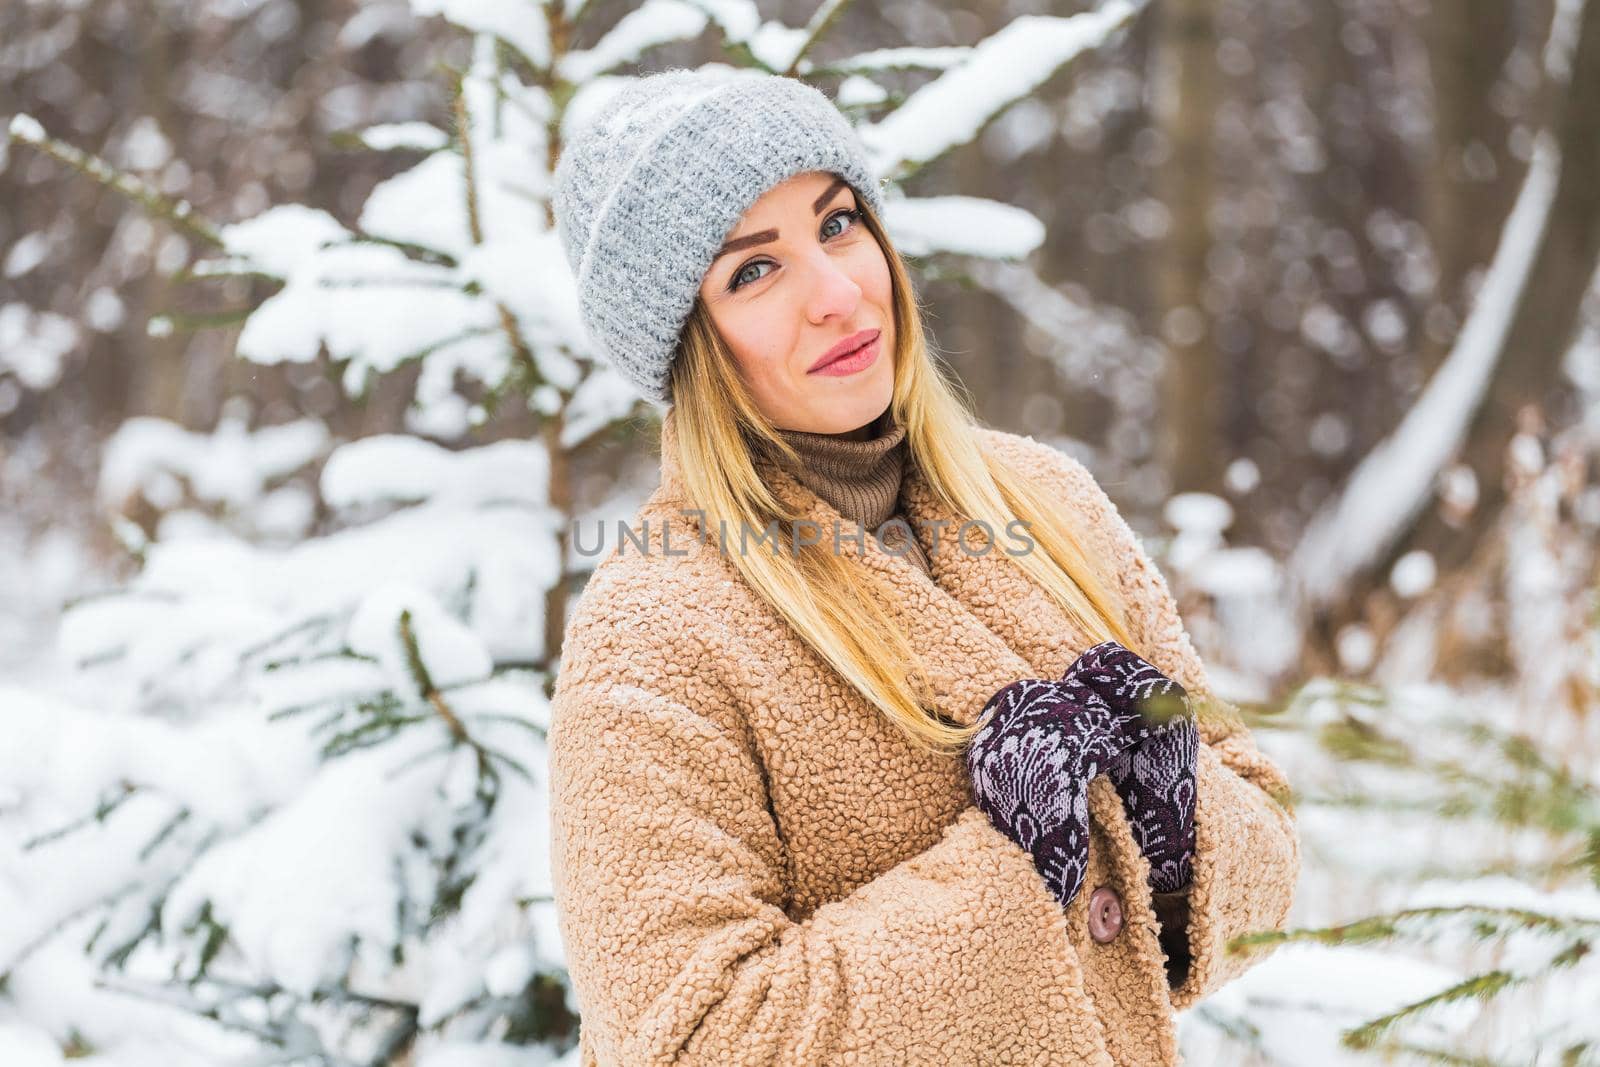 Attractive young woman in winter time outdoor. Snow, holidays and season.